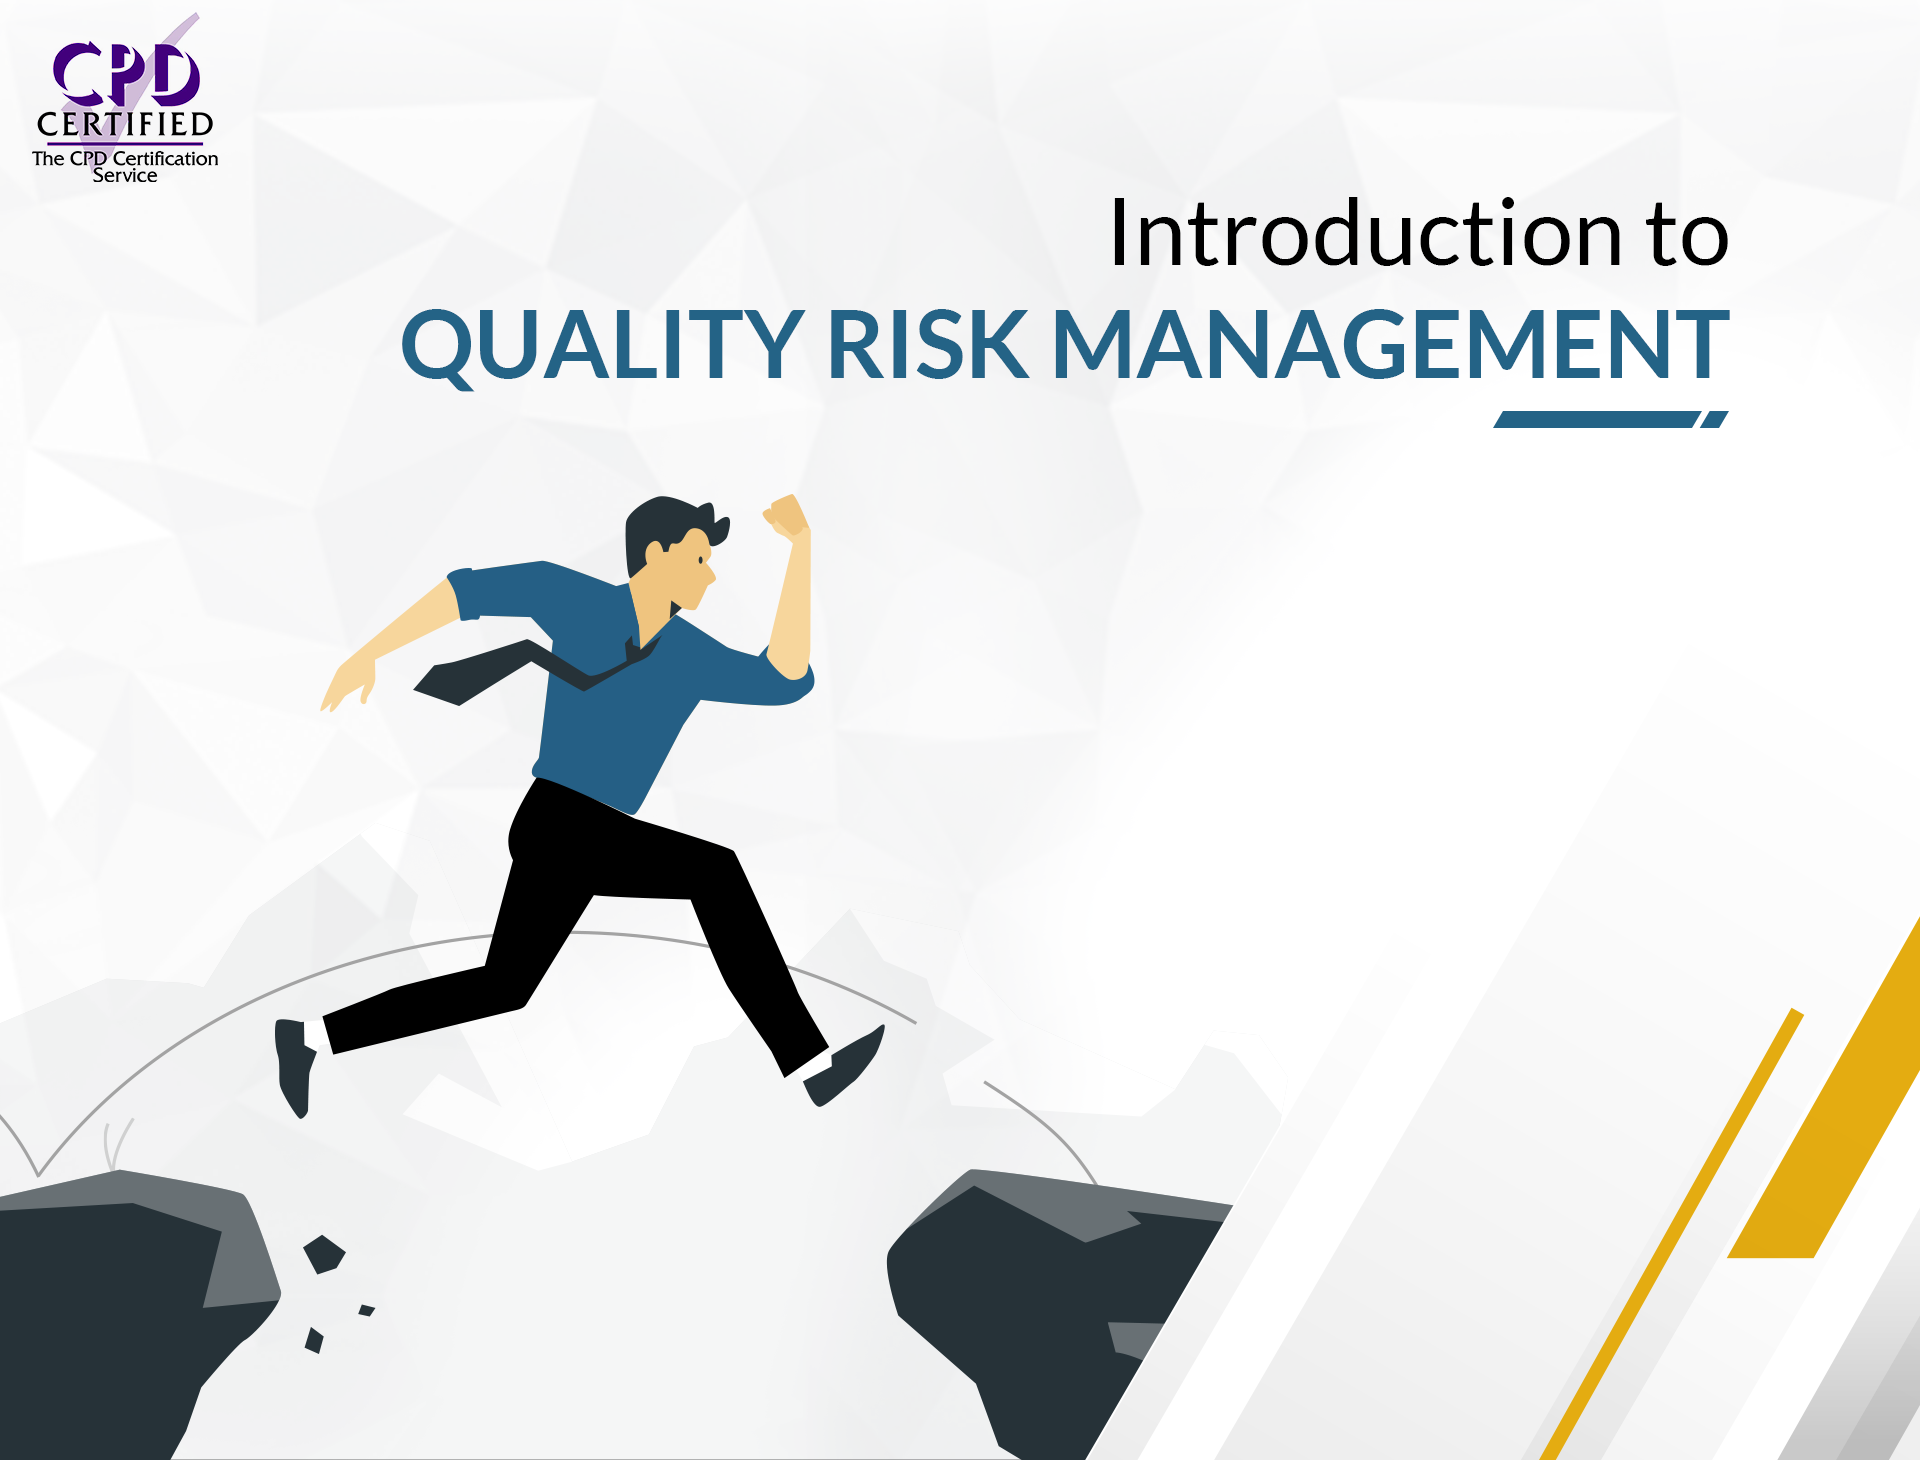 Introduction to Quality Risk Management